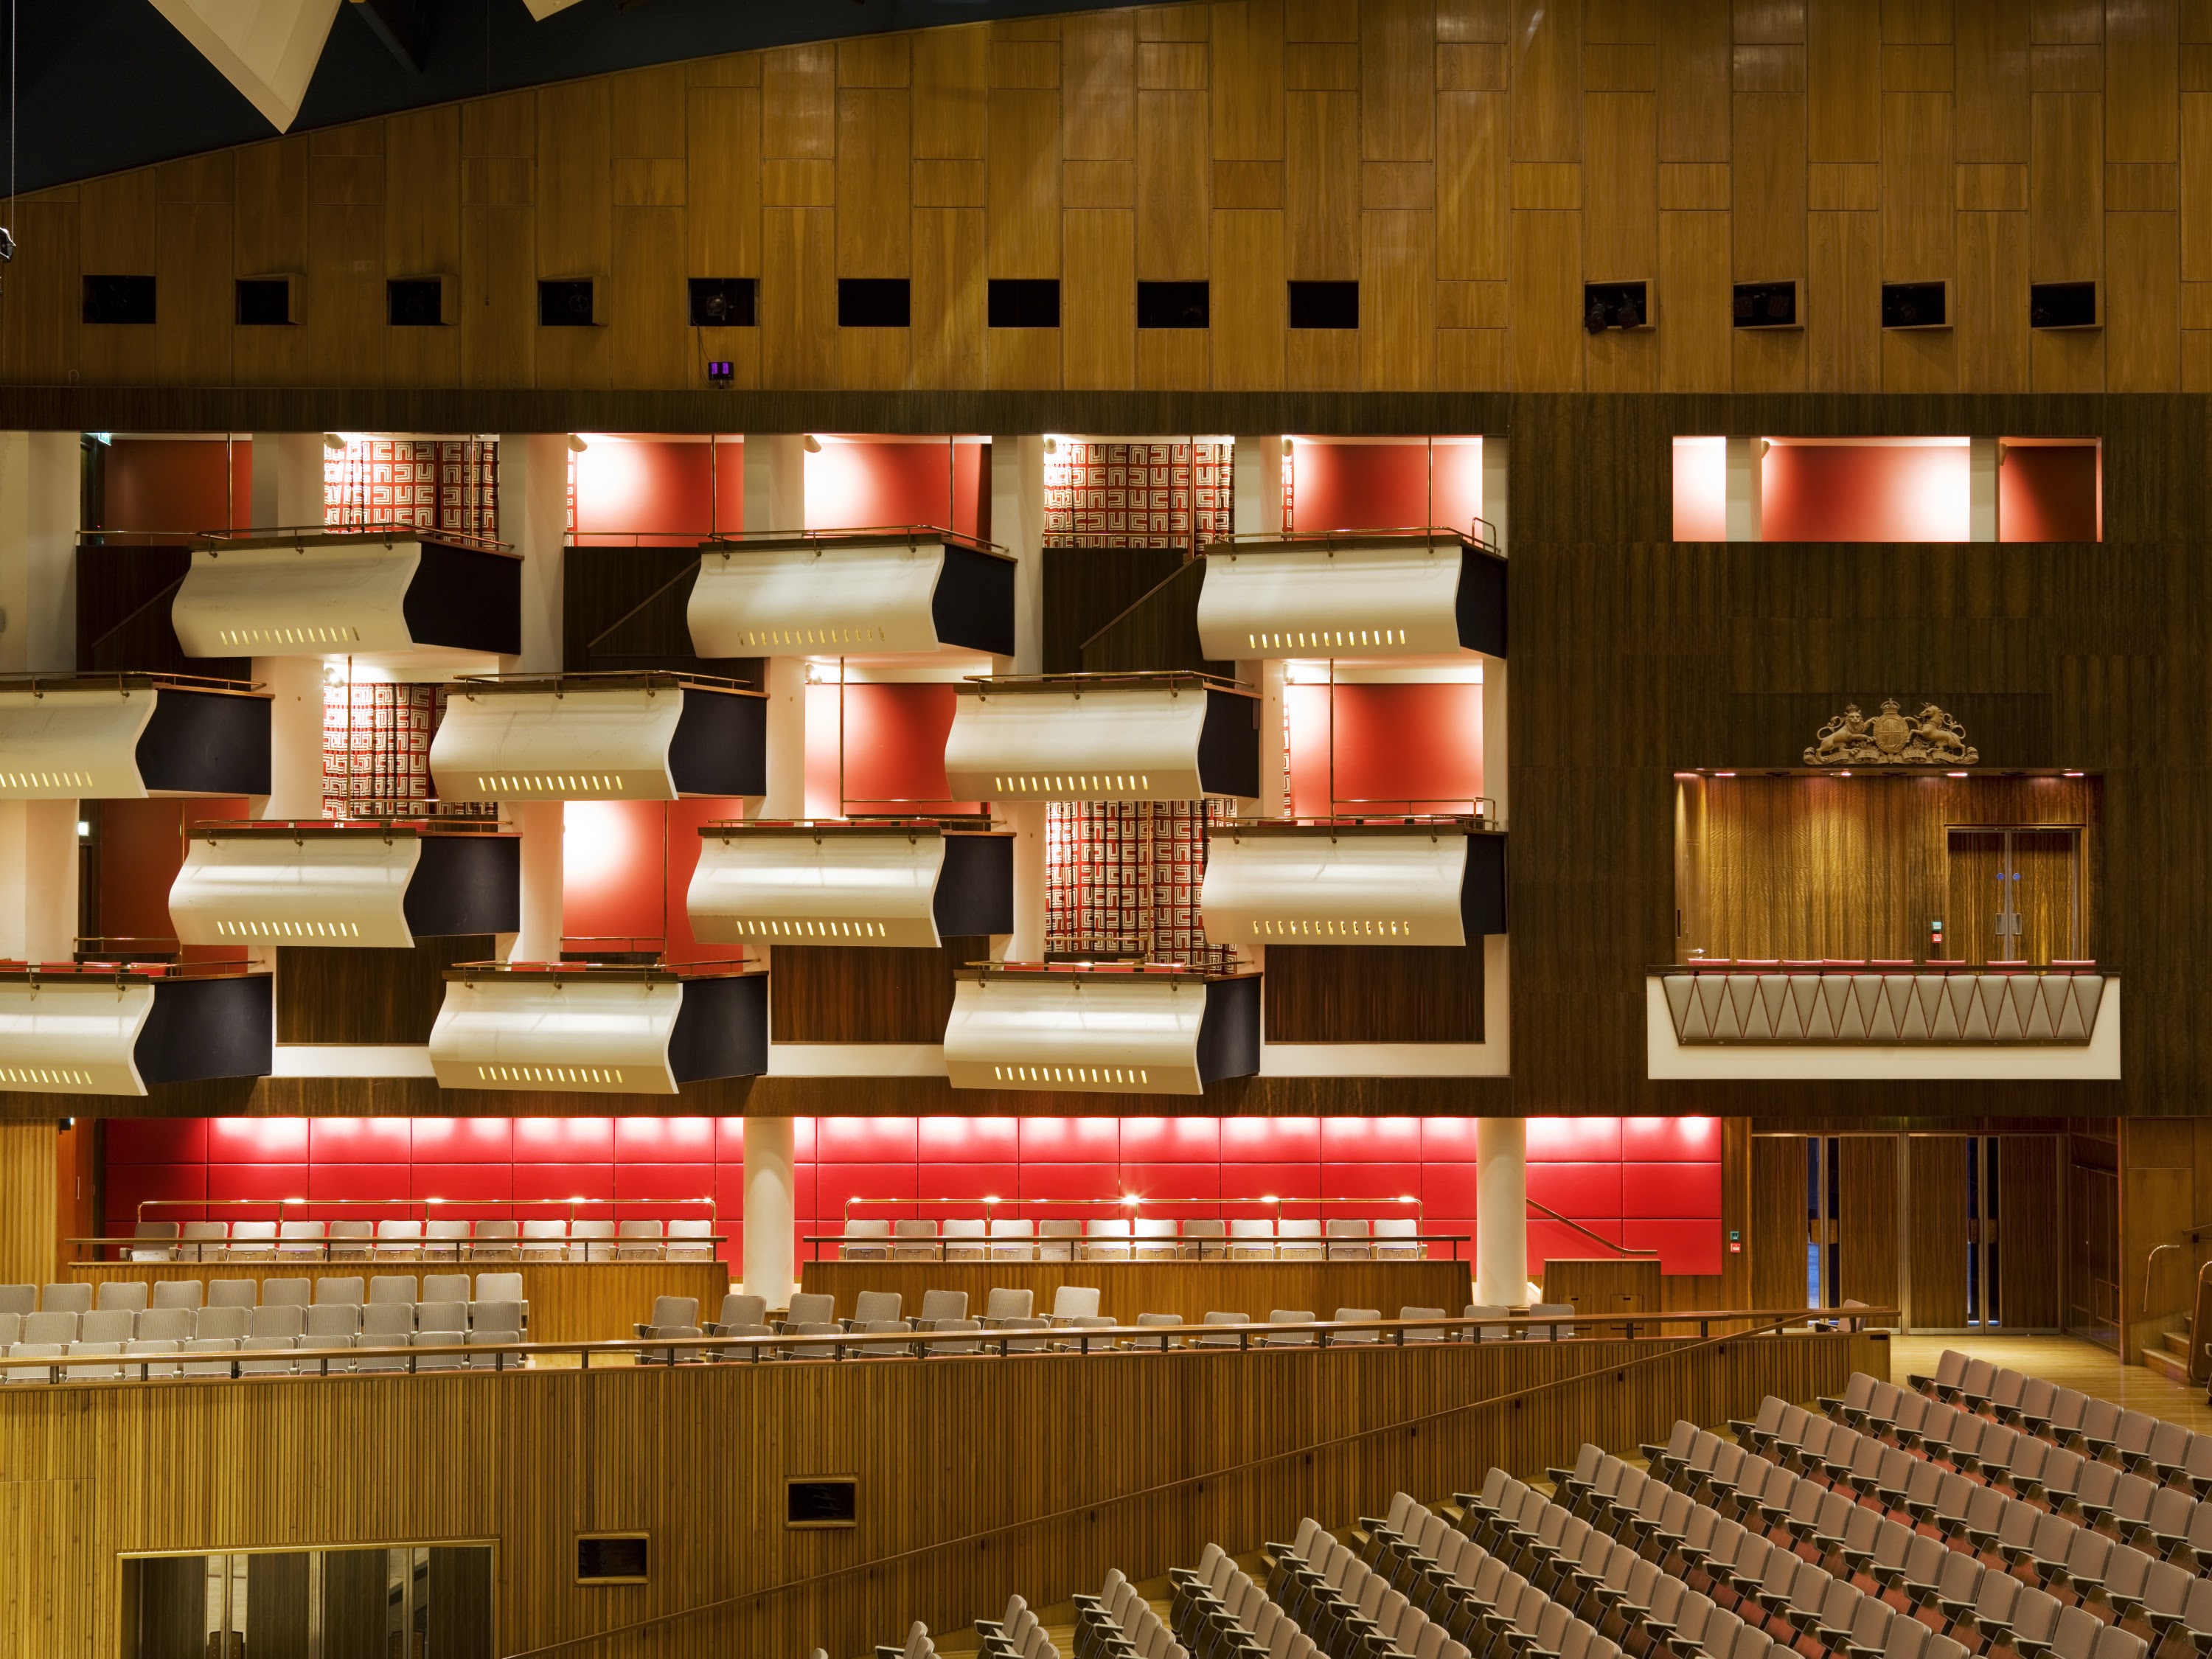 Detailed view of seating in the auditorium of the Royal Festival Hall